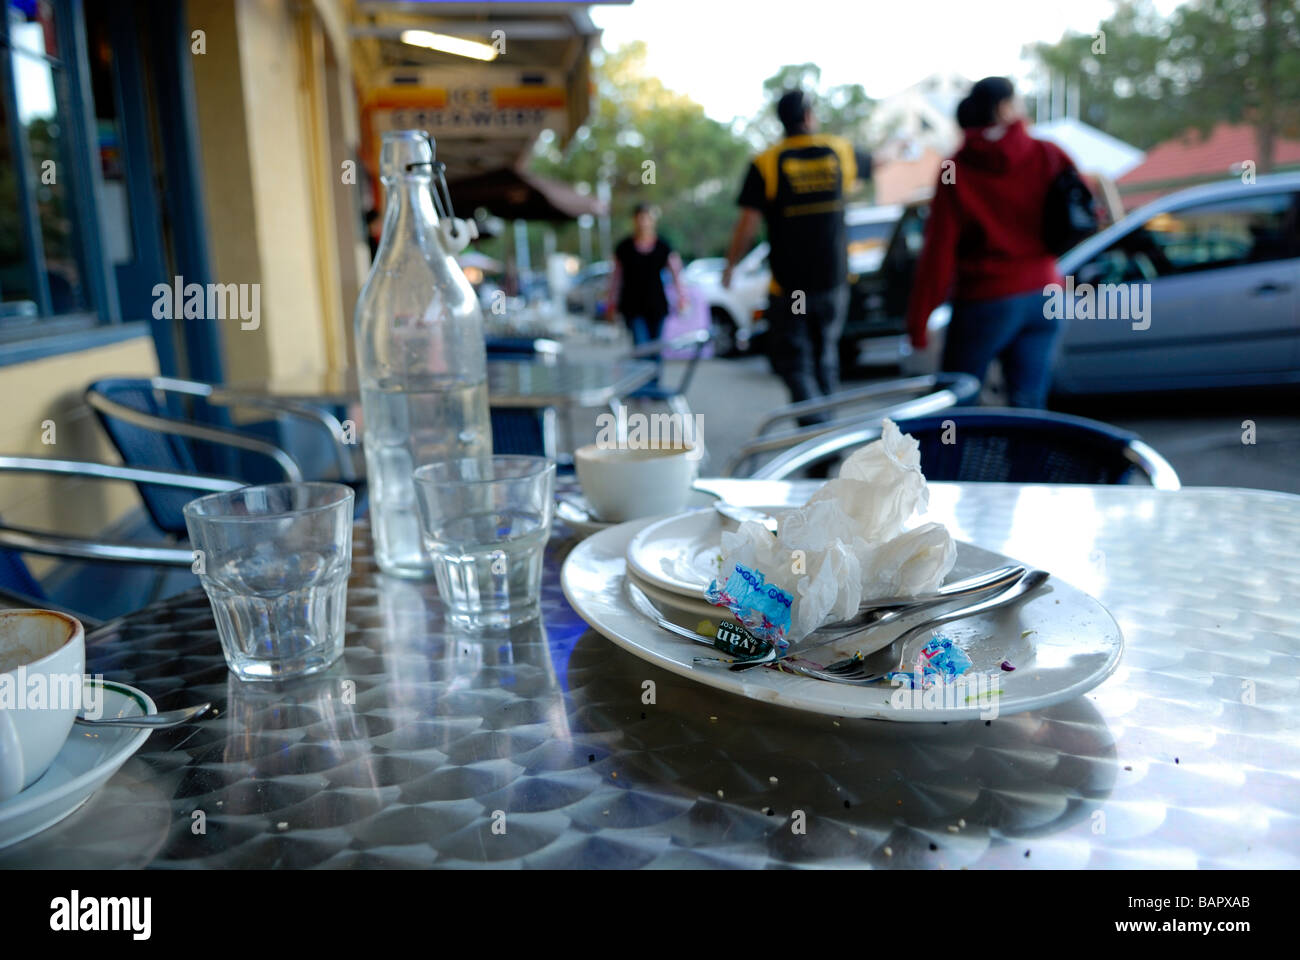 Remnants of a meal at a sidewalk restaurant. Fremantle, Perth, Western Australia Stock Photo